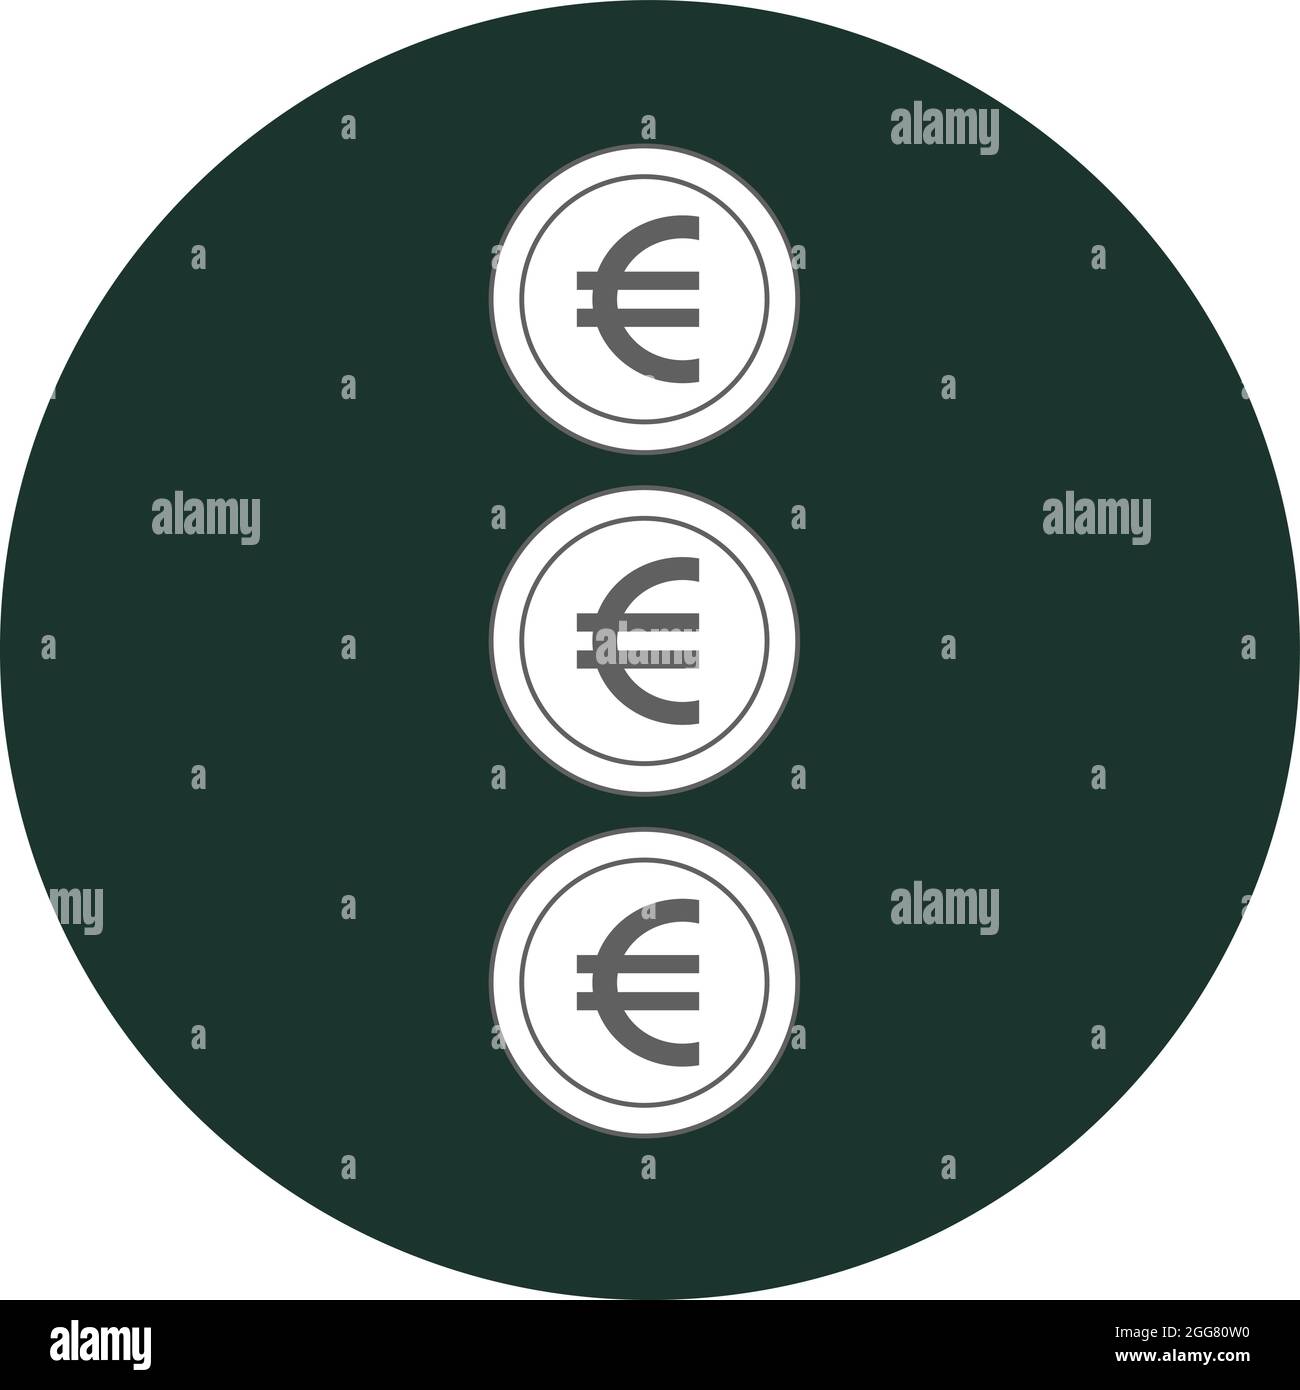 Euro coins, illustration, on a white background. Stock Vector